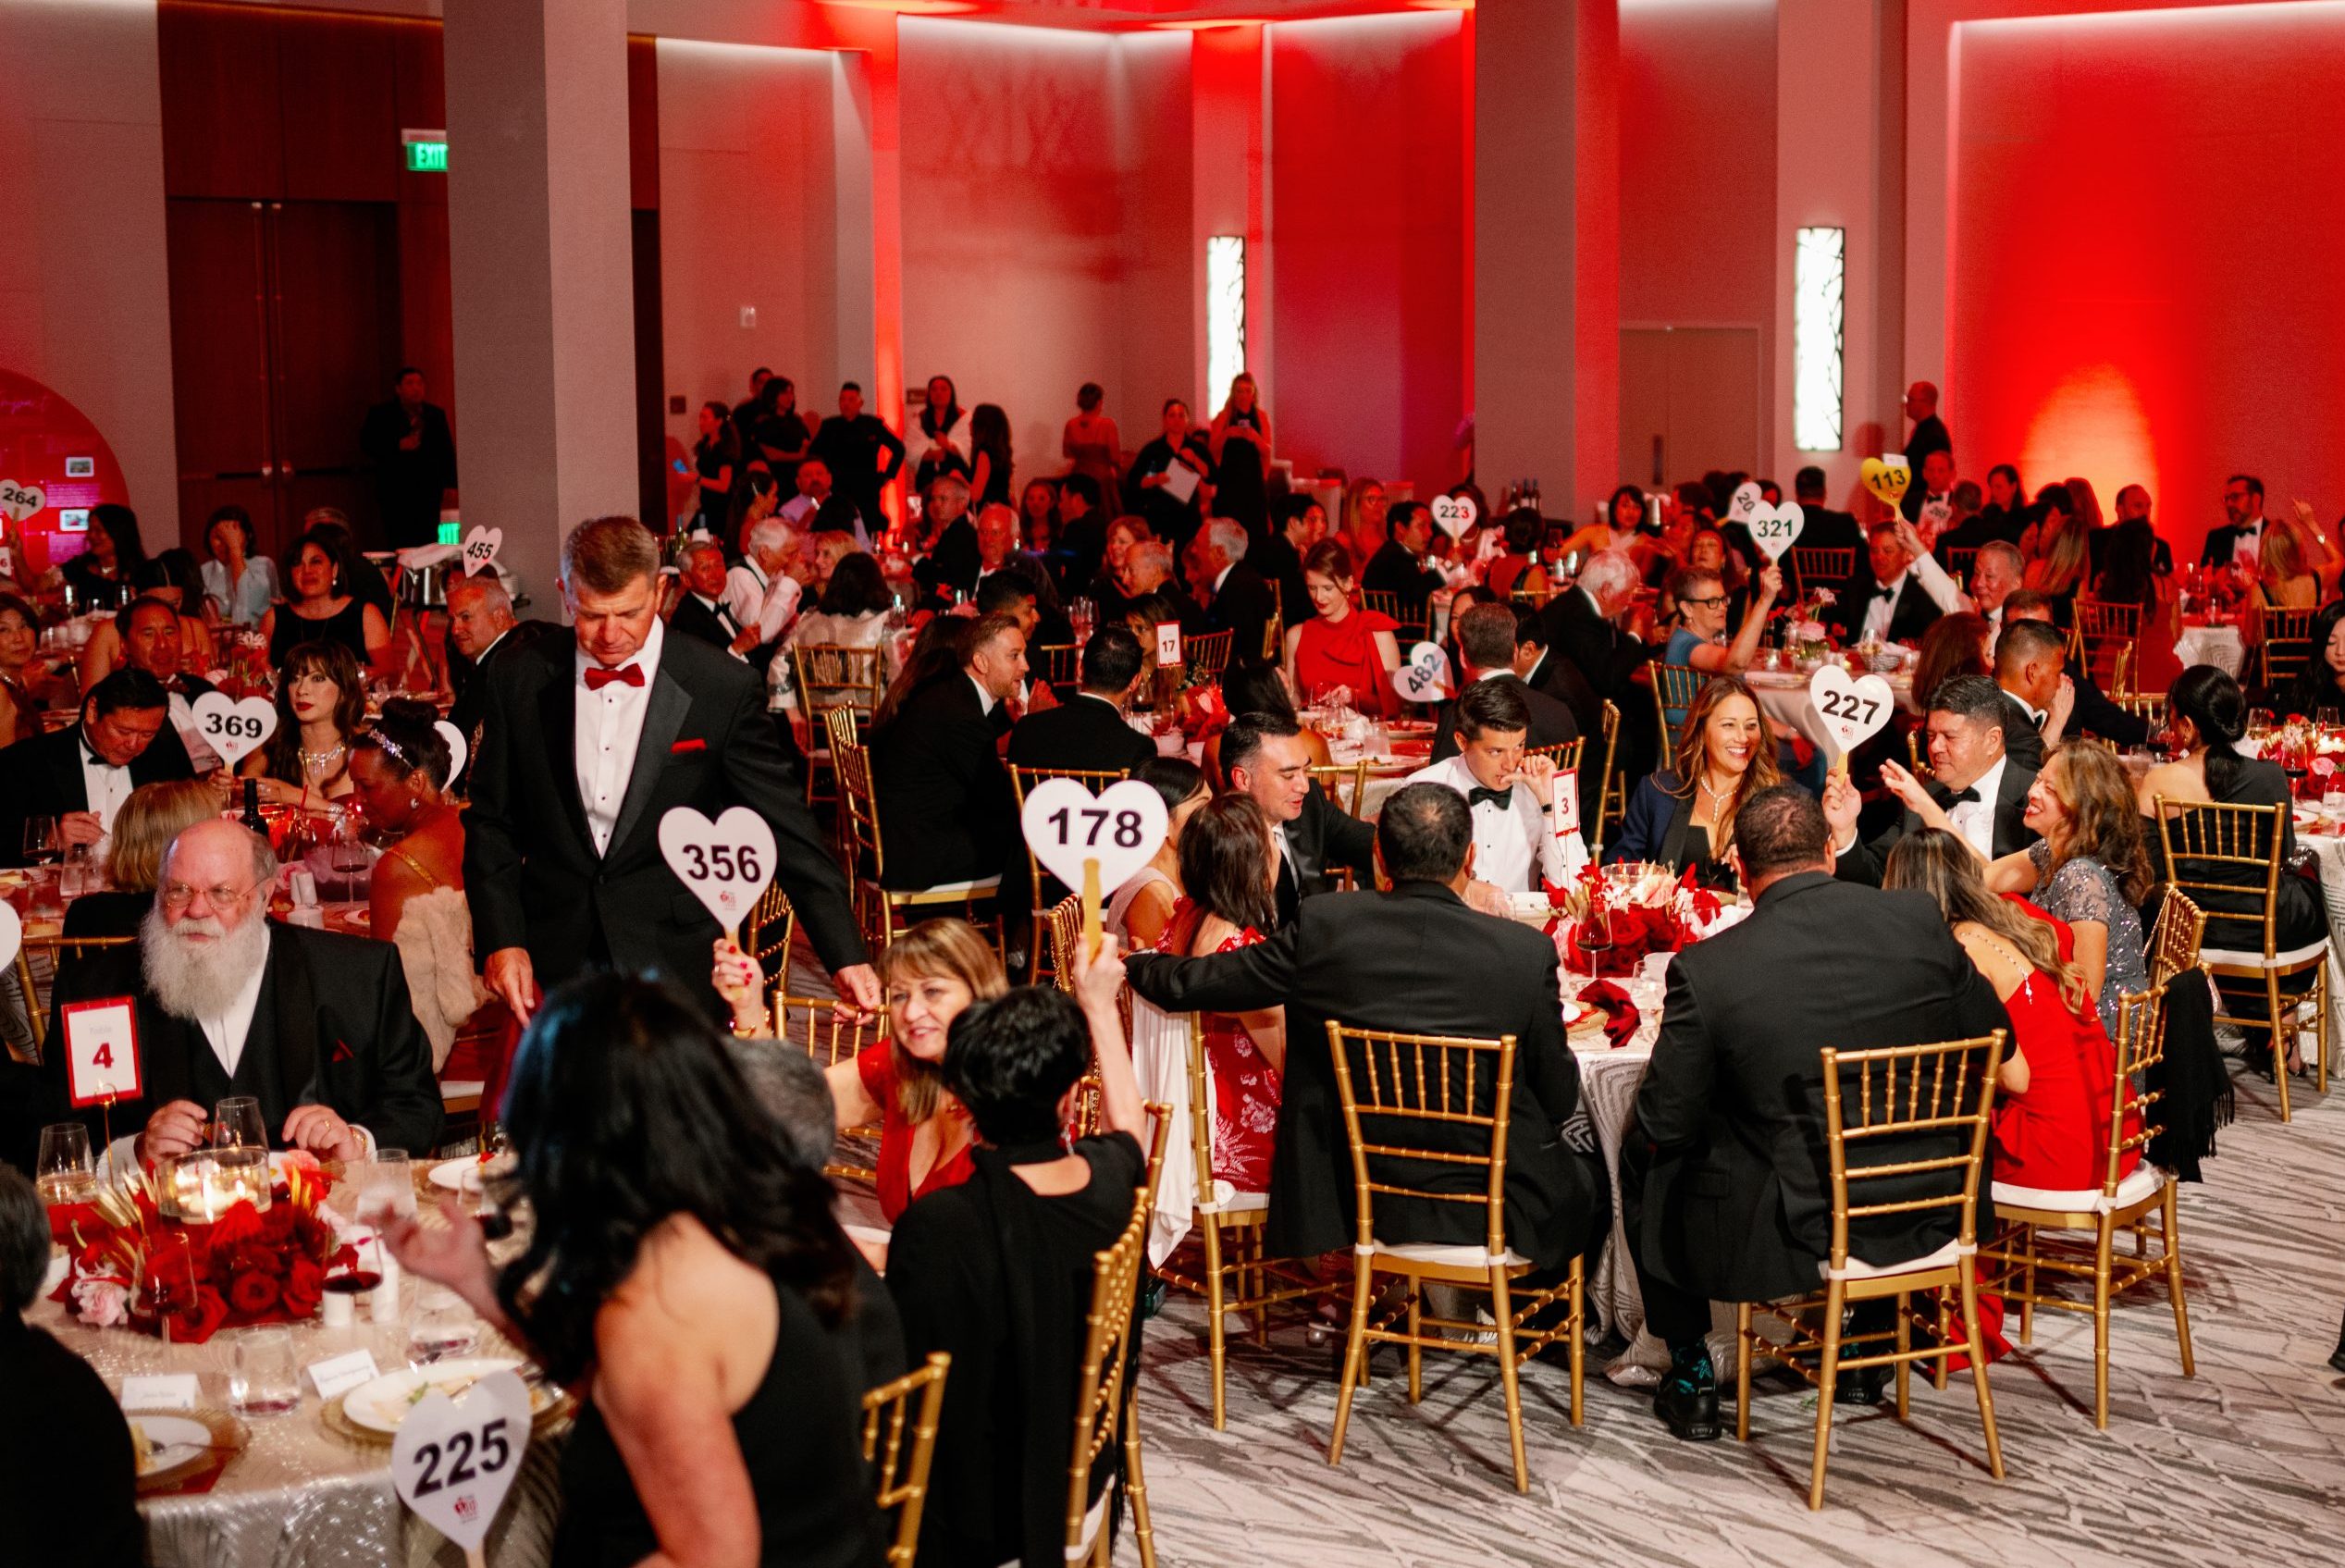 Heart Ball suppoters wearing tuxedos and dresses sit at round tables with heart shaped auction paddles in a hotel ballroom bathed in red light.